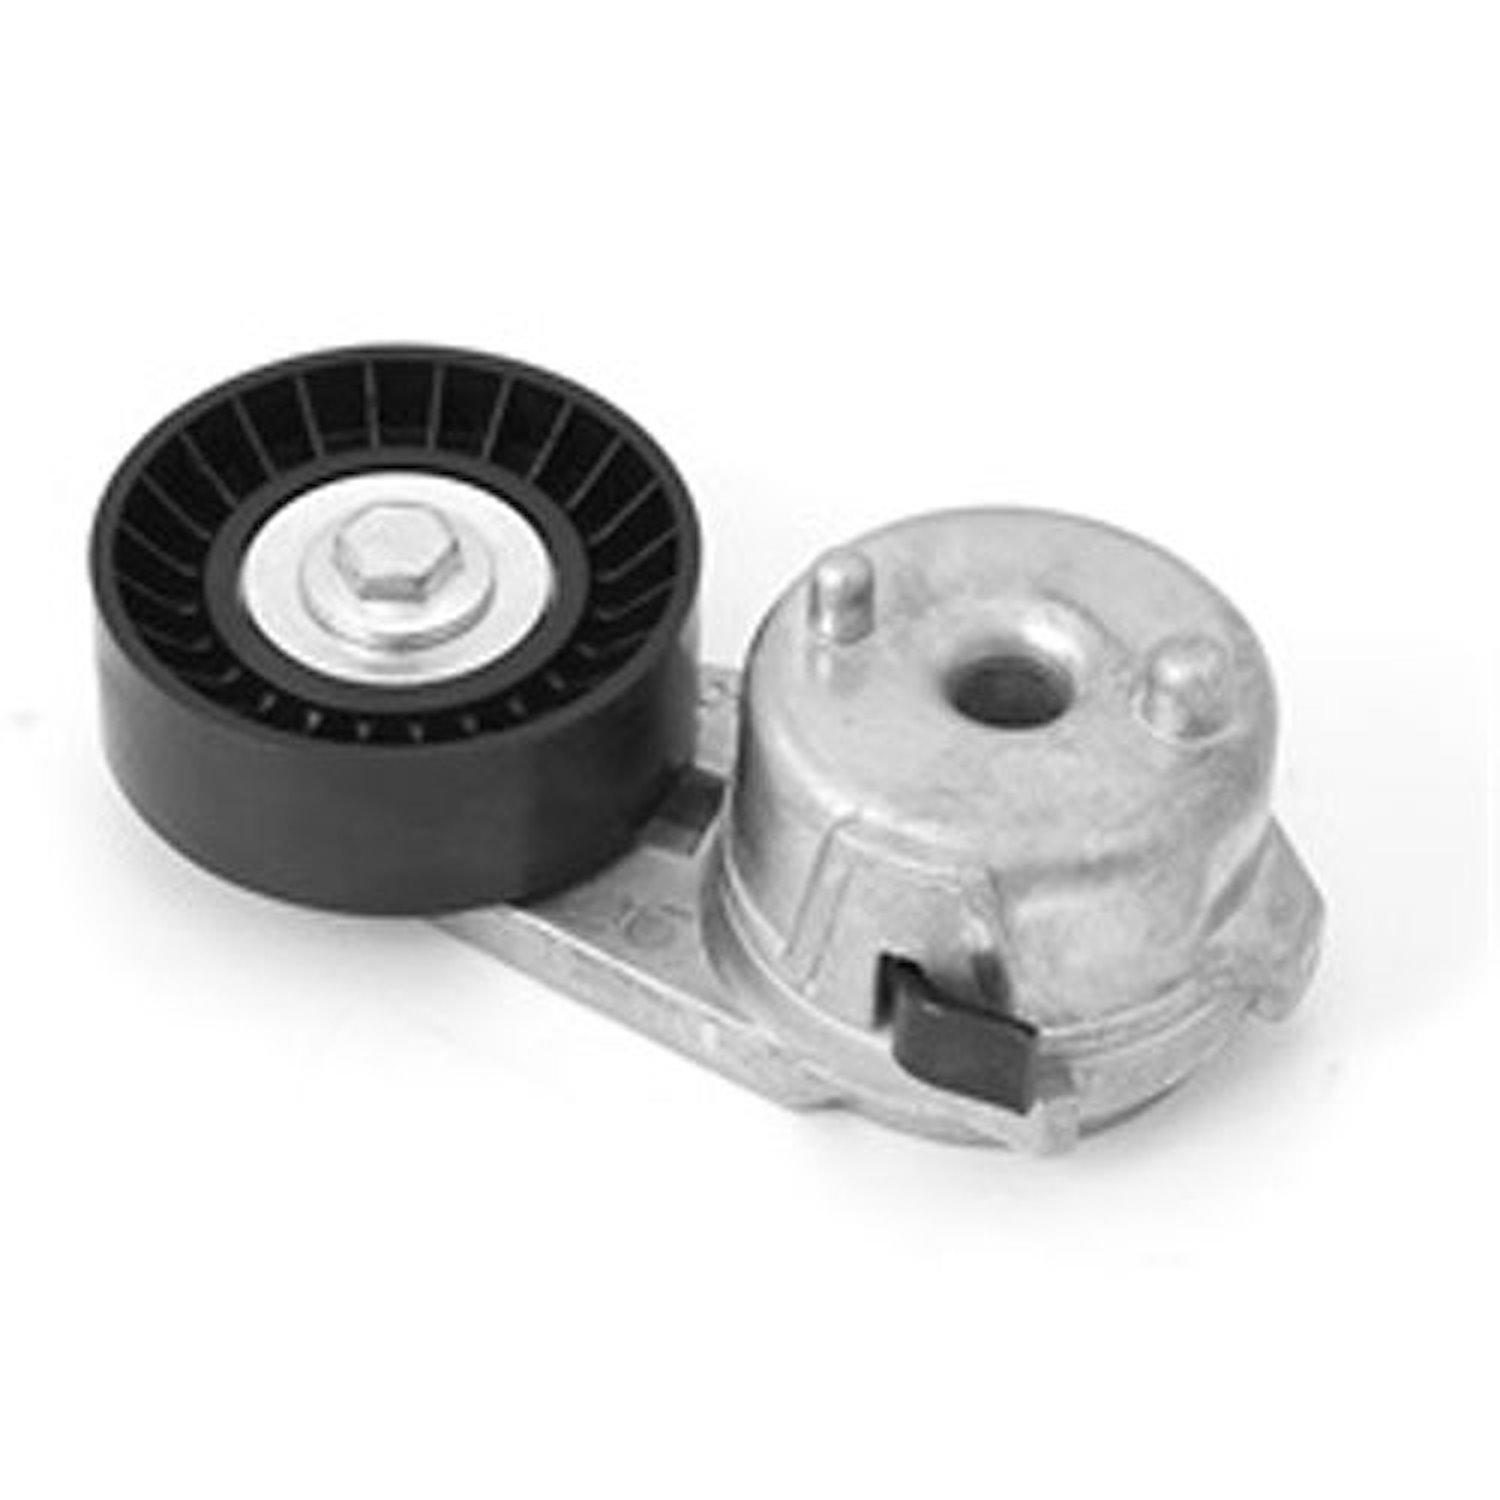 Replacement serpentine belt tensioner from Omix-ADA, Fits 07-11 Jeep Compass and Patriots with 2.0L or 2.4L gas engines.